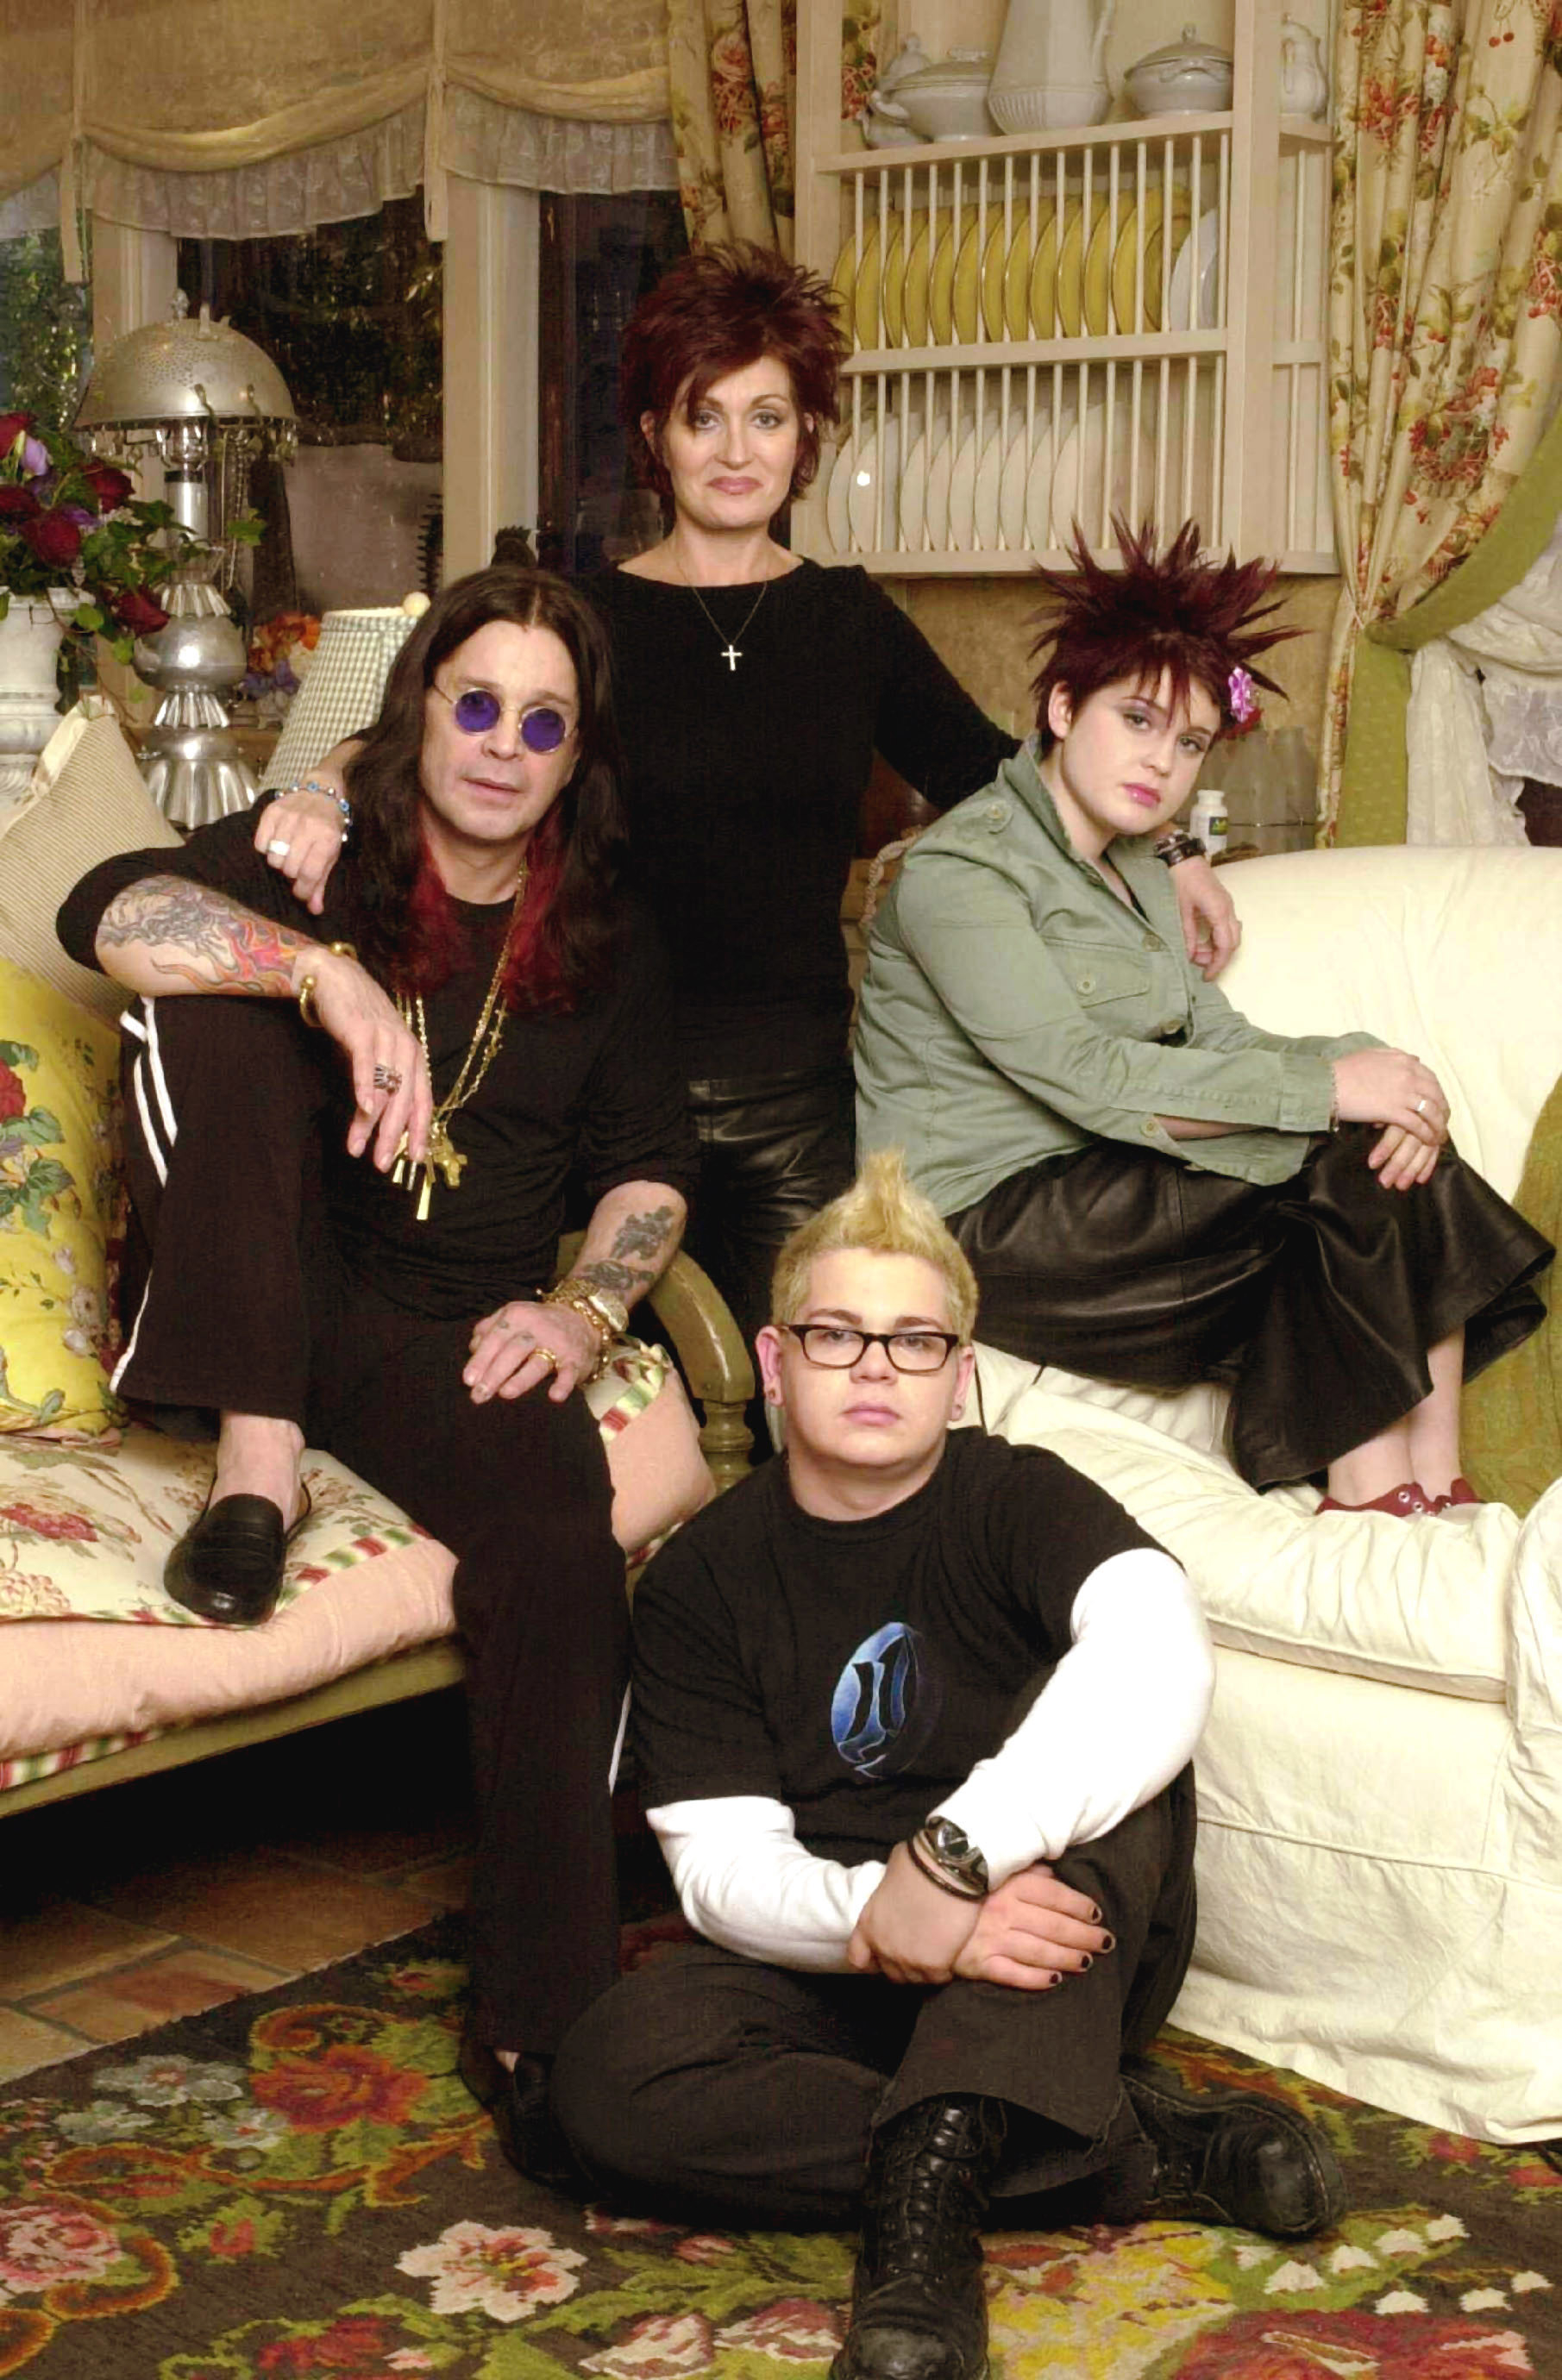 Ozzy and his family sitting or standing together